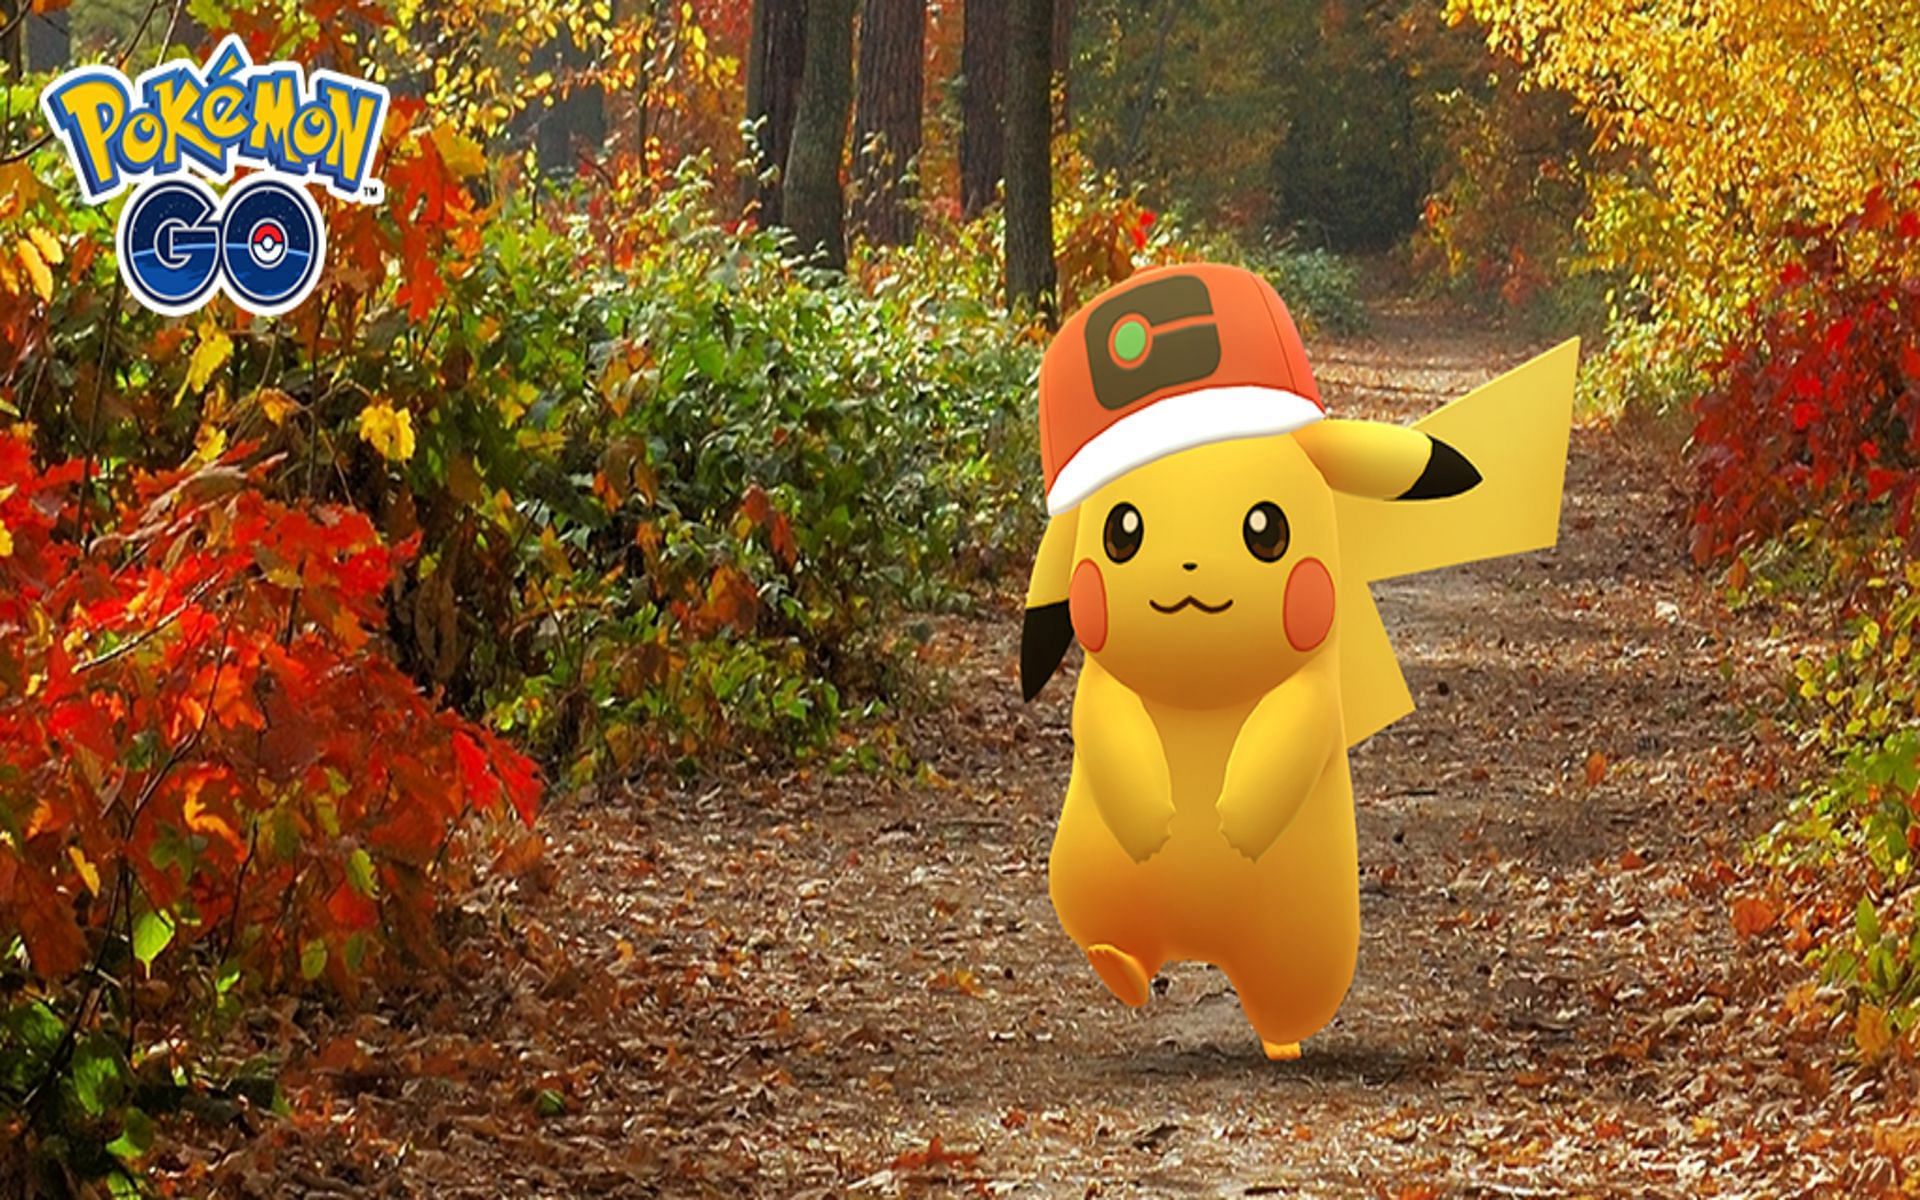 Pikachu is the most well-known Pokemon in the franchise (Image via Niantic)